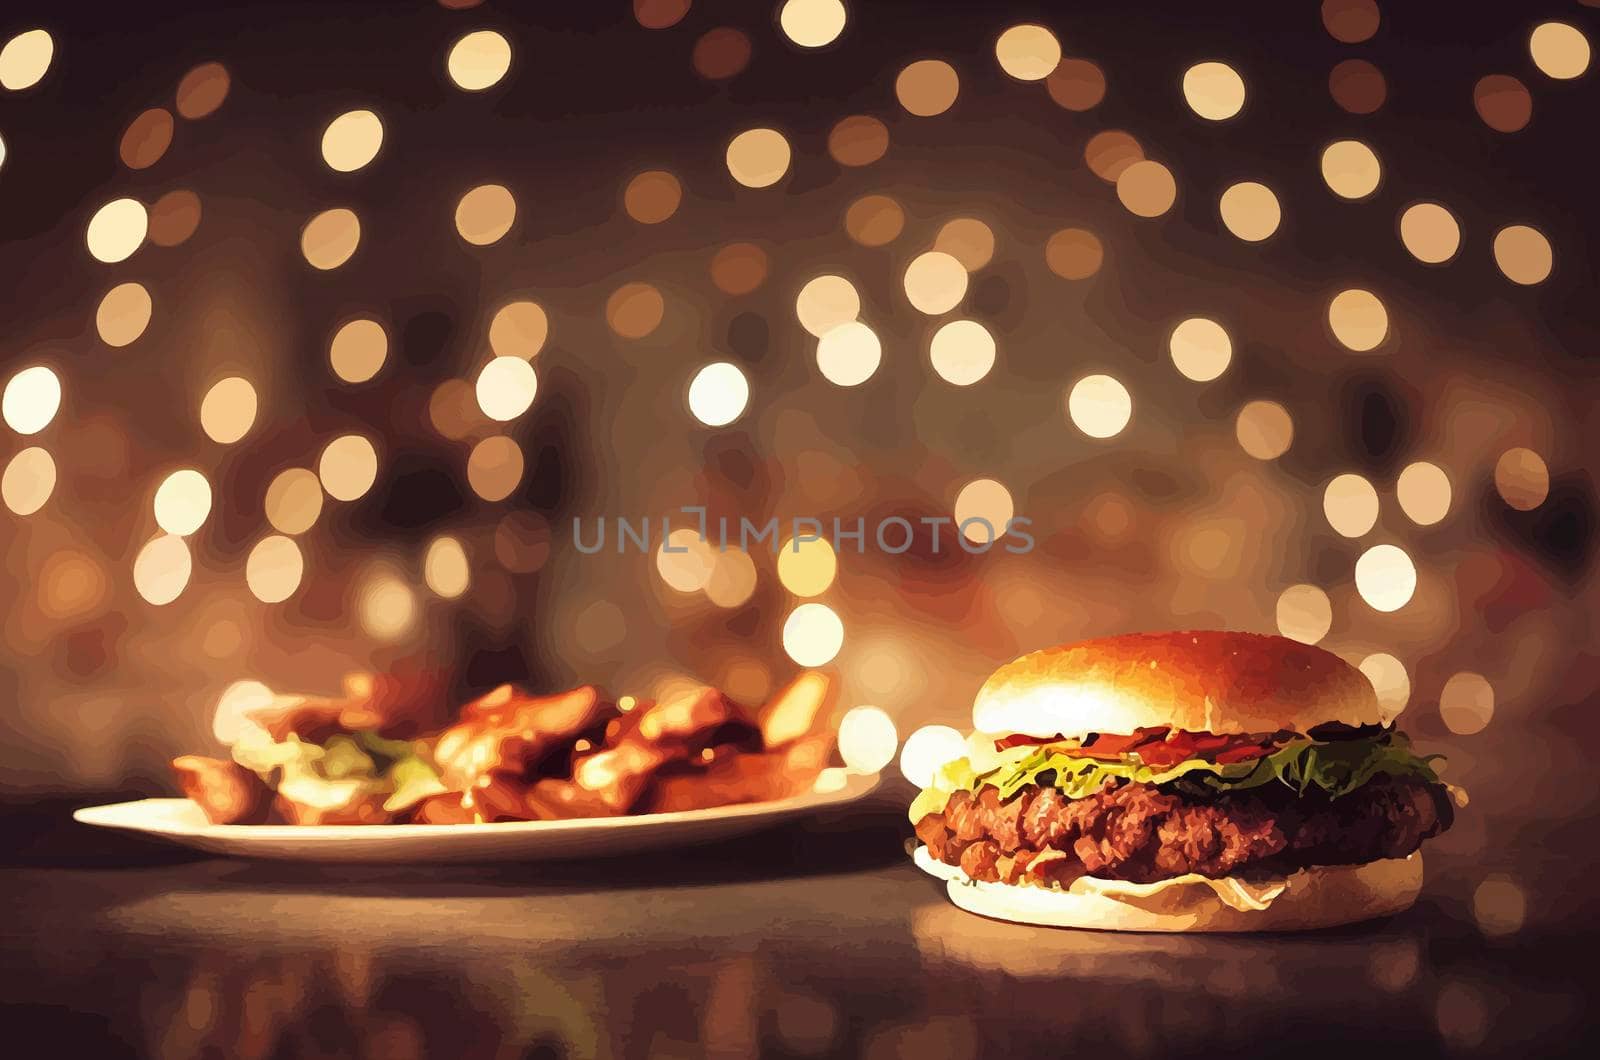 Illustration of delicious hamburger with lights in the background.